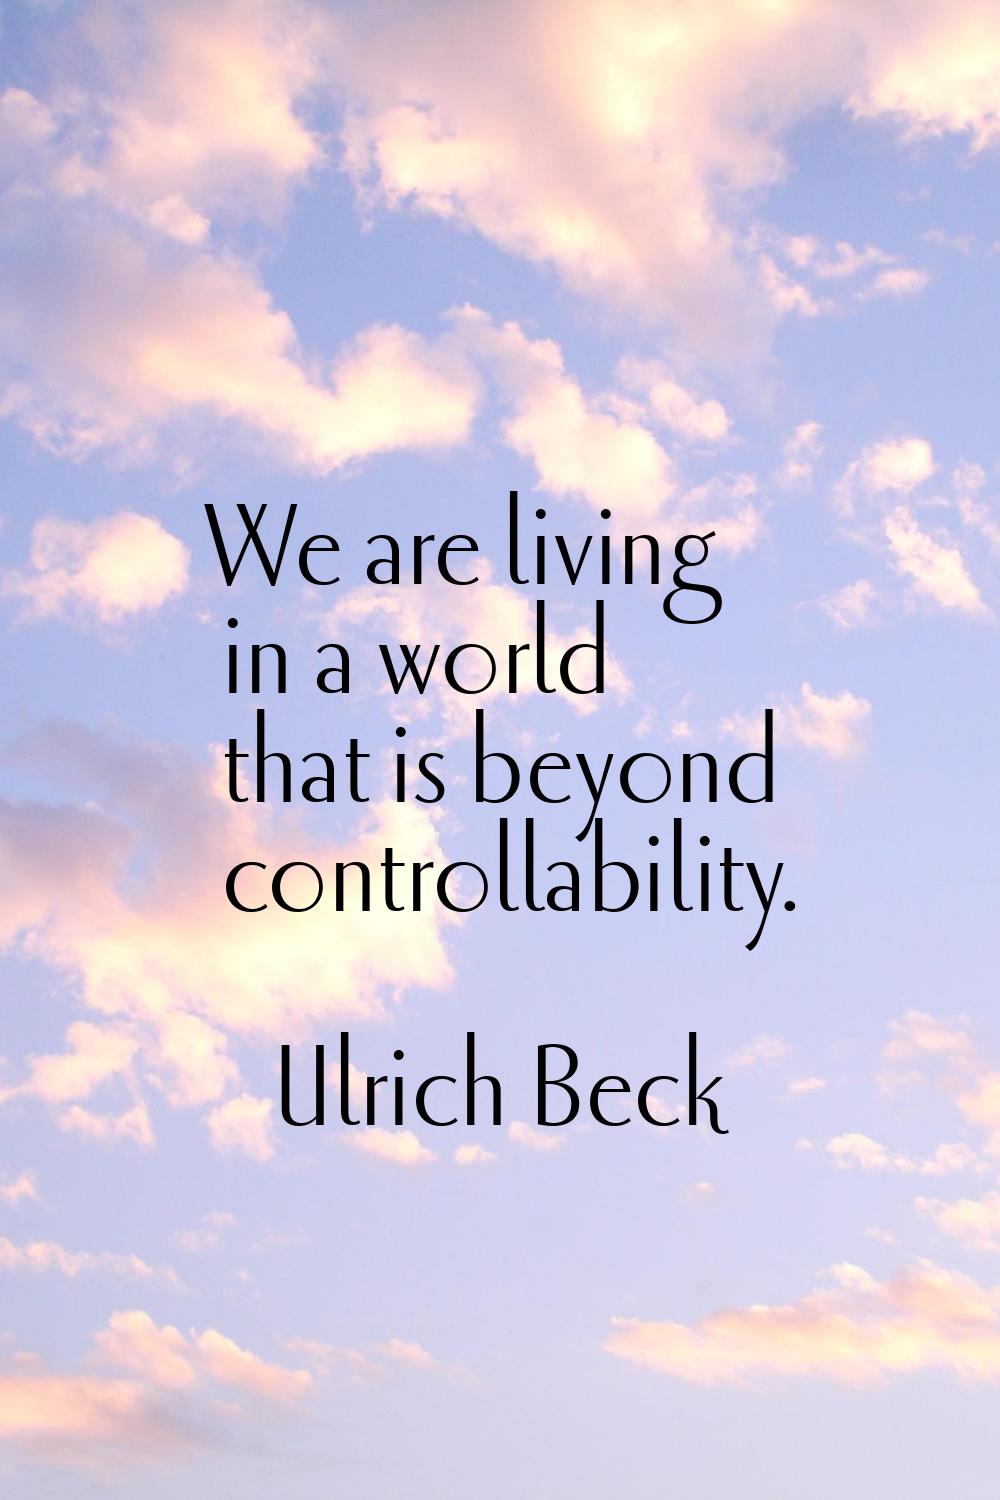 We are living in a world that is beyond controllability.